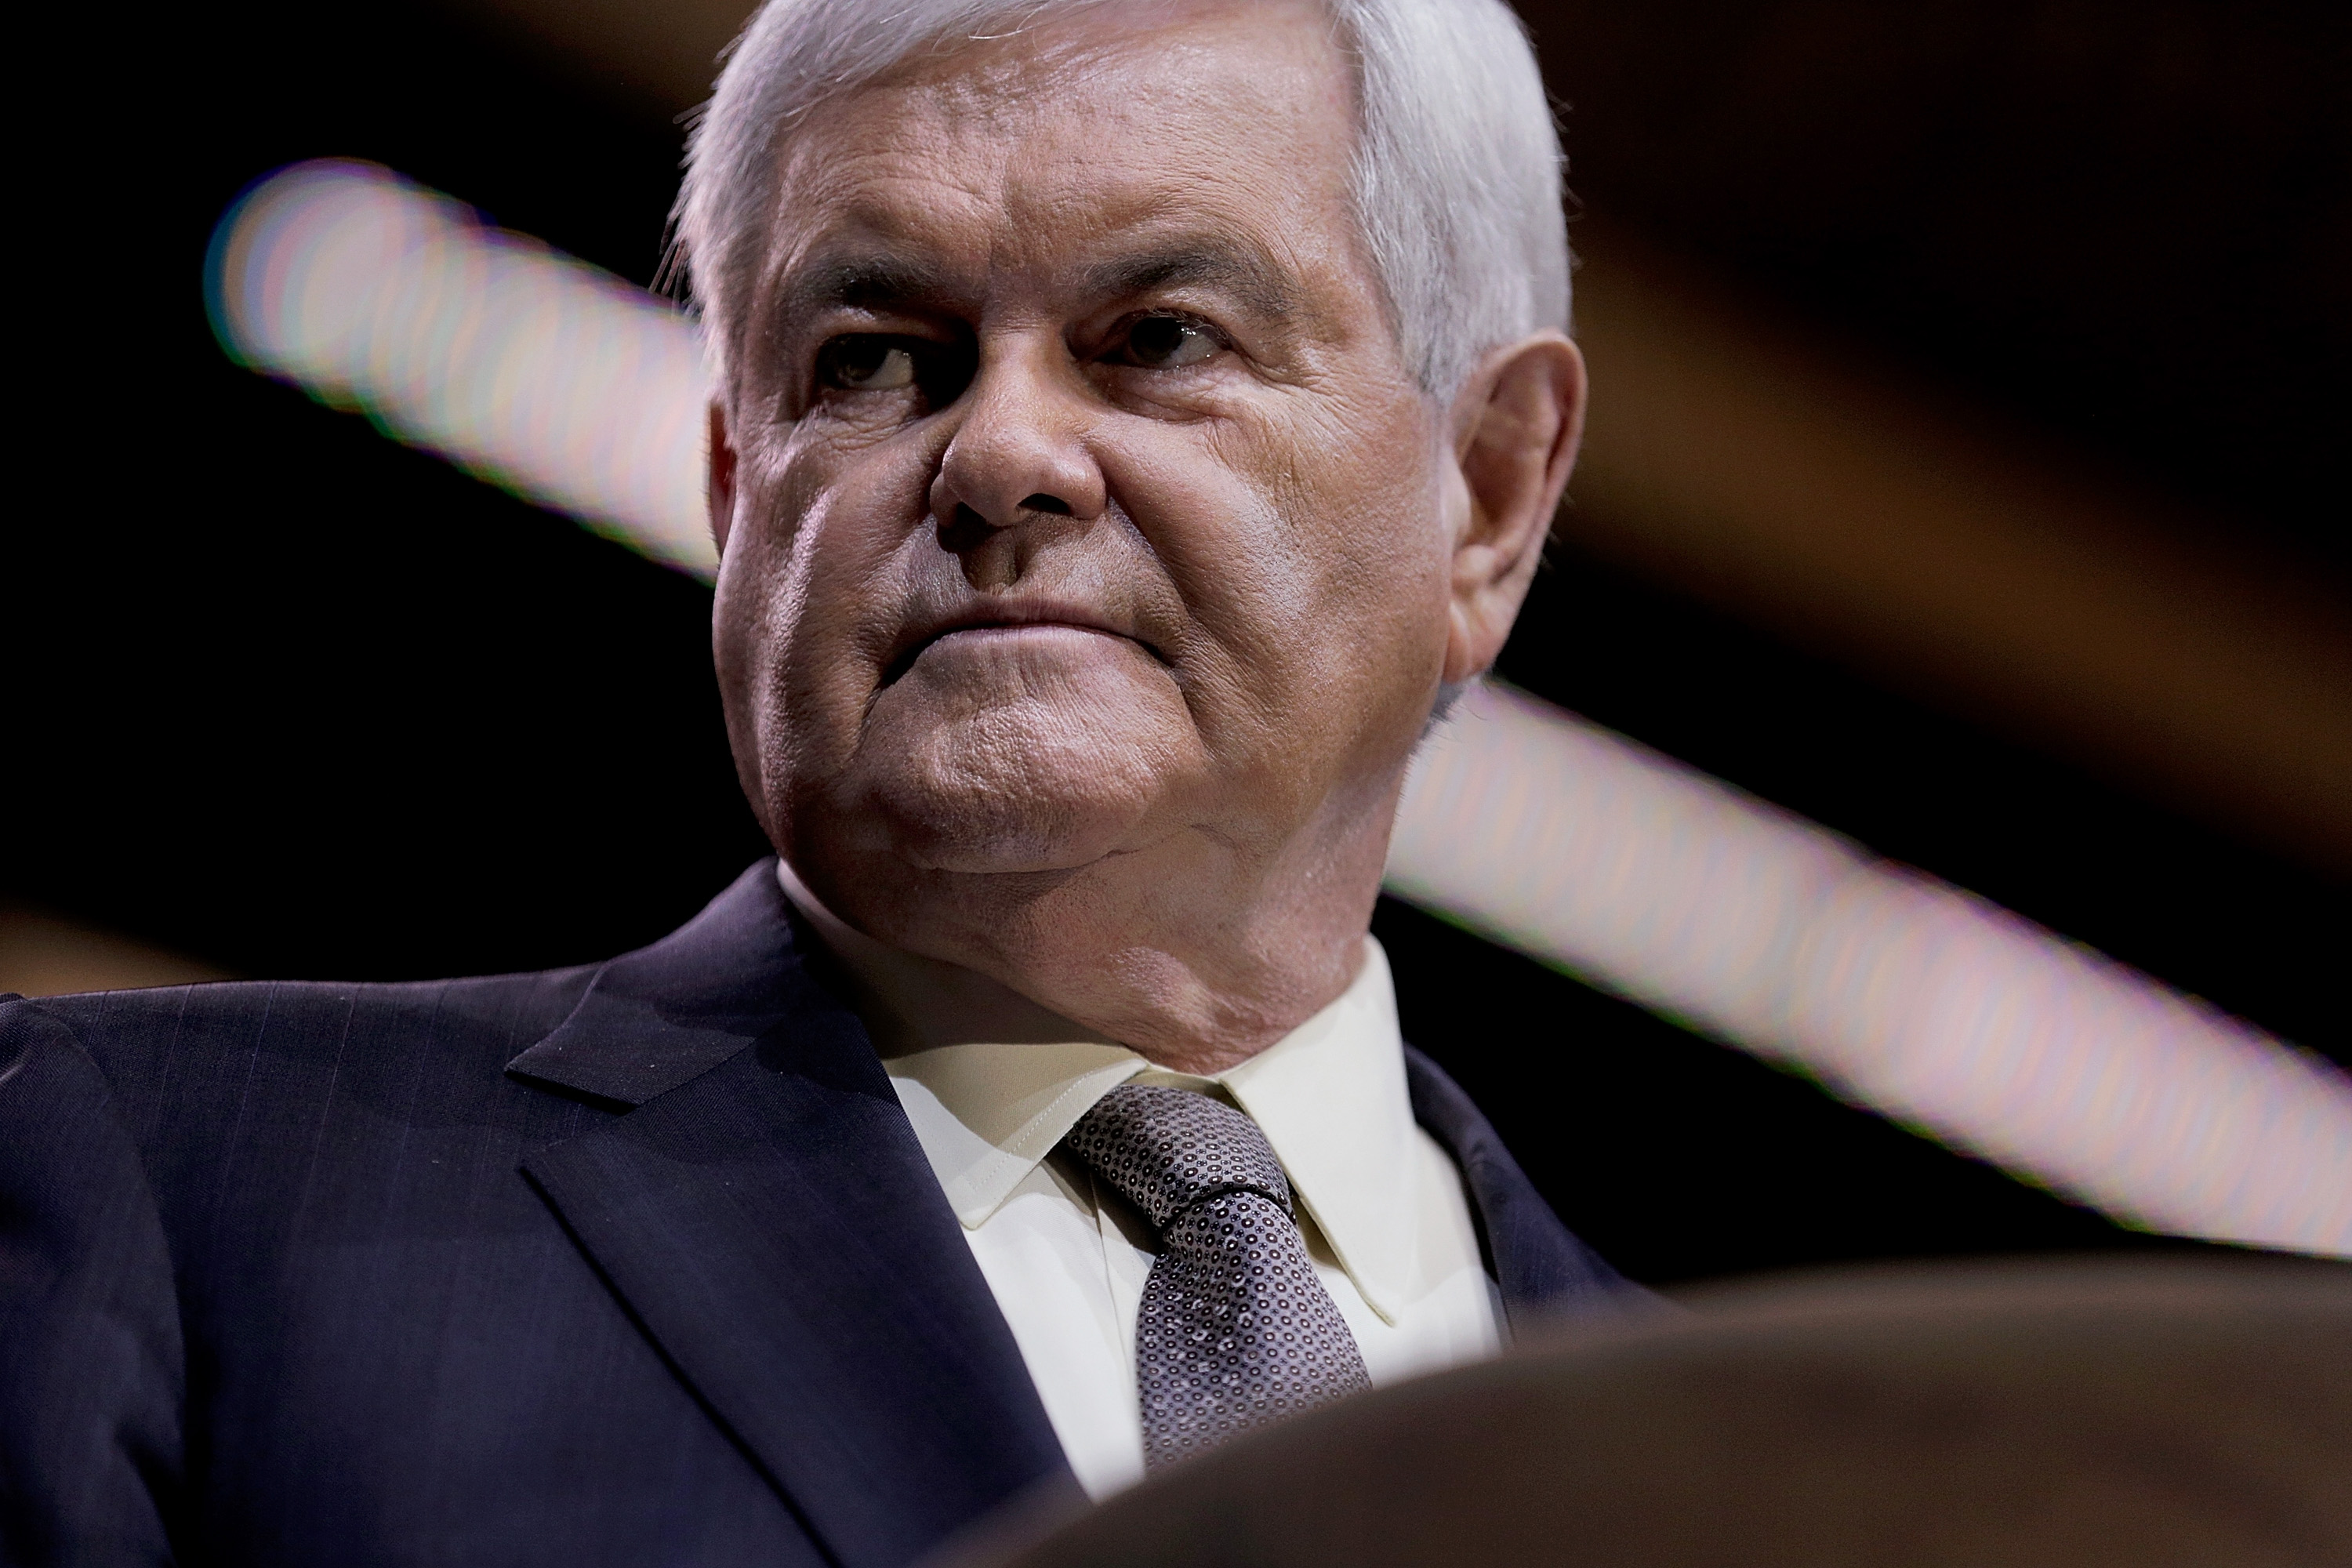 Newt Gingrich, former speaker of the U.S. House of Representatives, speaks during the 41st annual Conservative Political Action Conference at the Gaylord International Hotel and Conference Center in National Harbor, Md., on March 8, 2014.